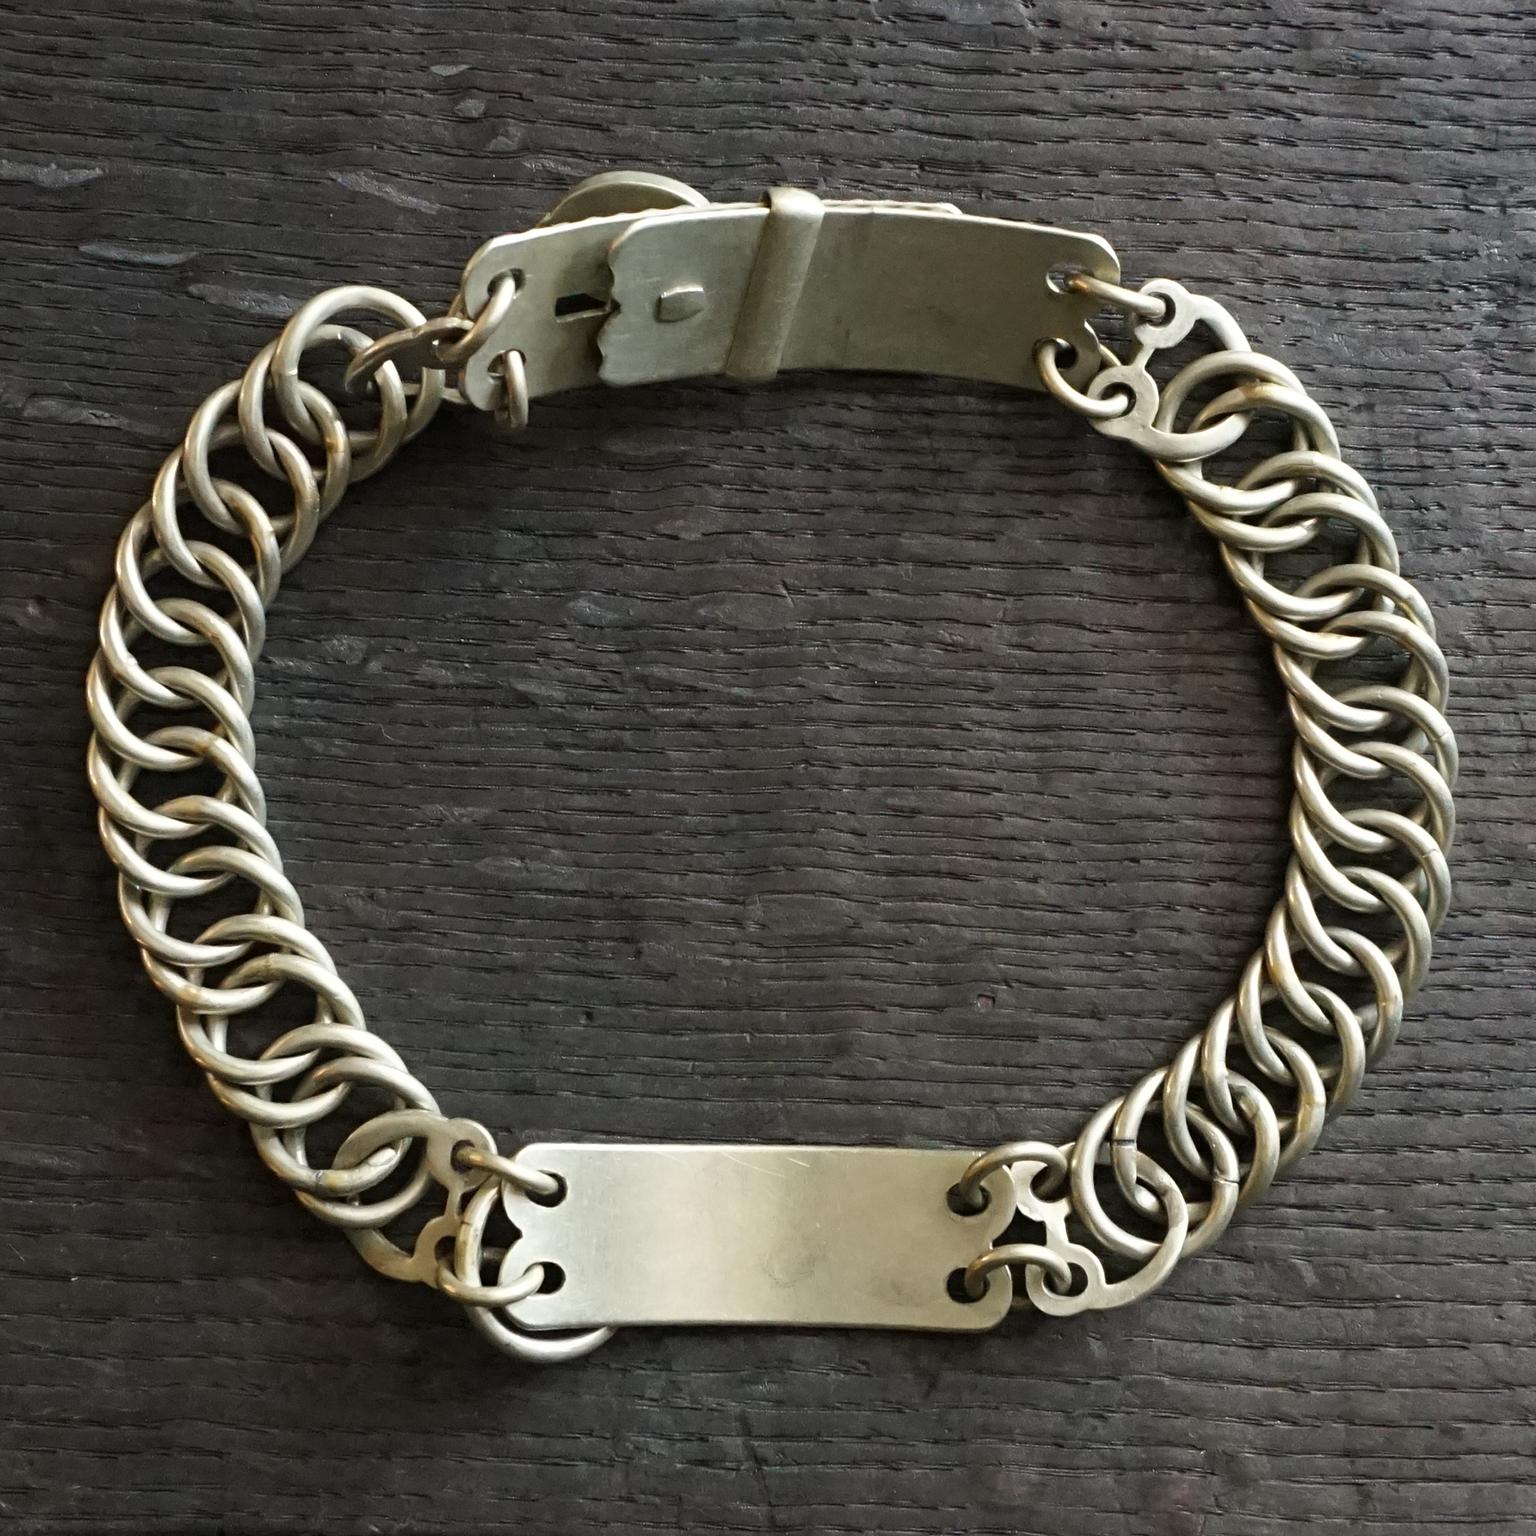 Victorian 19th Century Nickel Silver French Adjustable Linked Dog Collar with Lock and Key